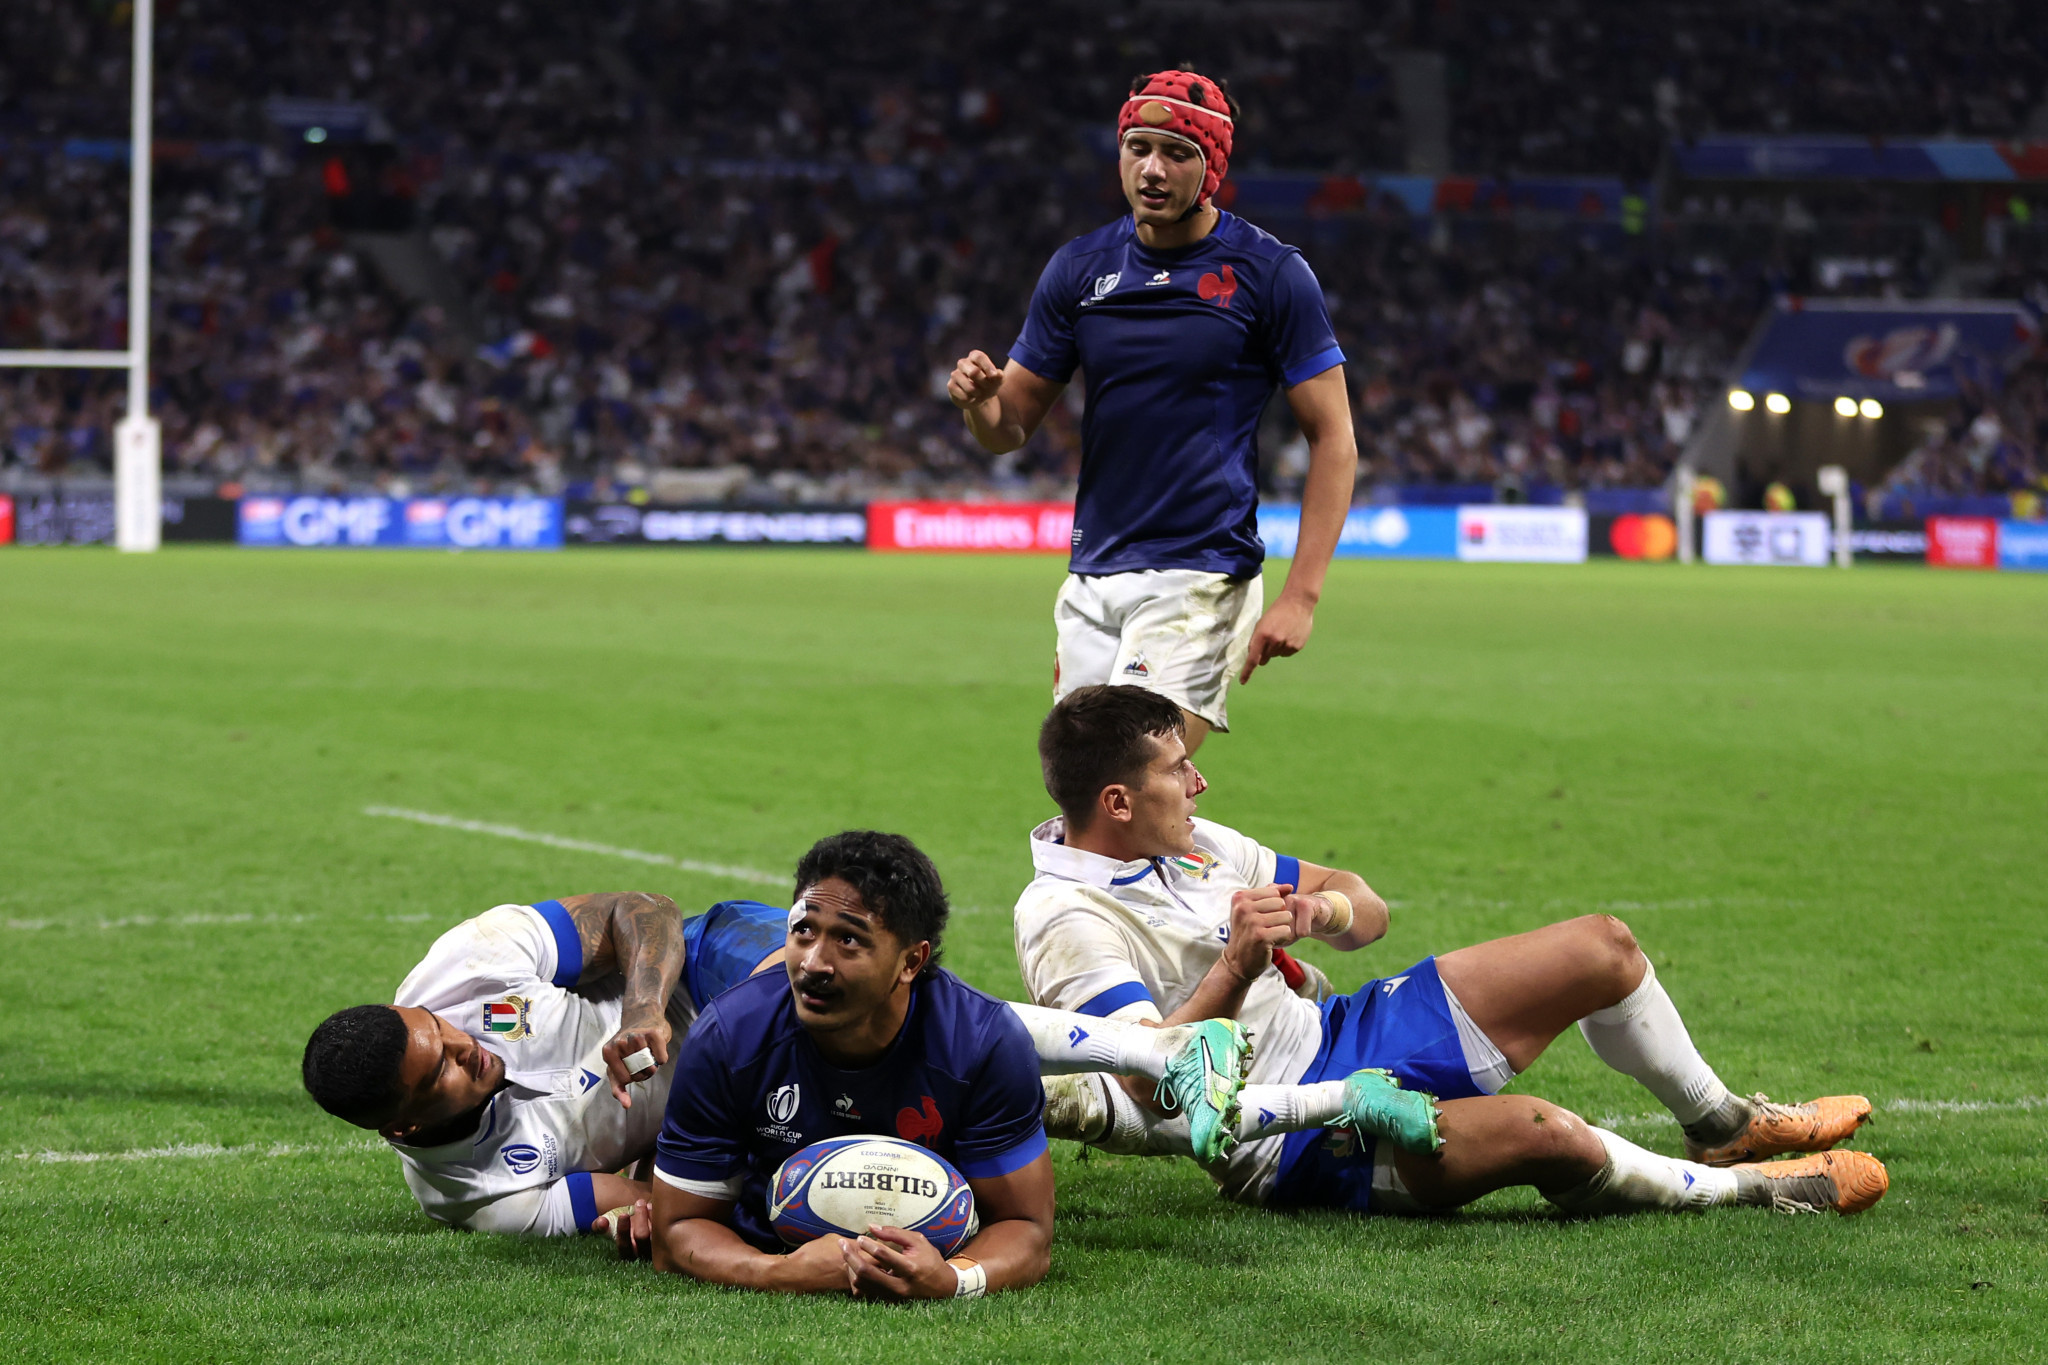 Yoram Moefana scored two late tries as France finished top of Rugby World Cup Pool A after a big win over Italy ©Getty Images